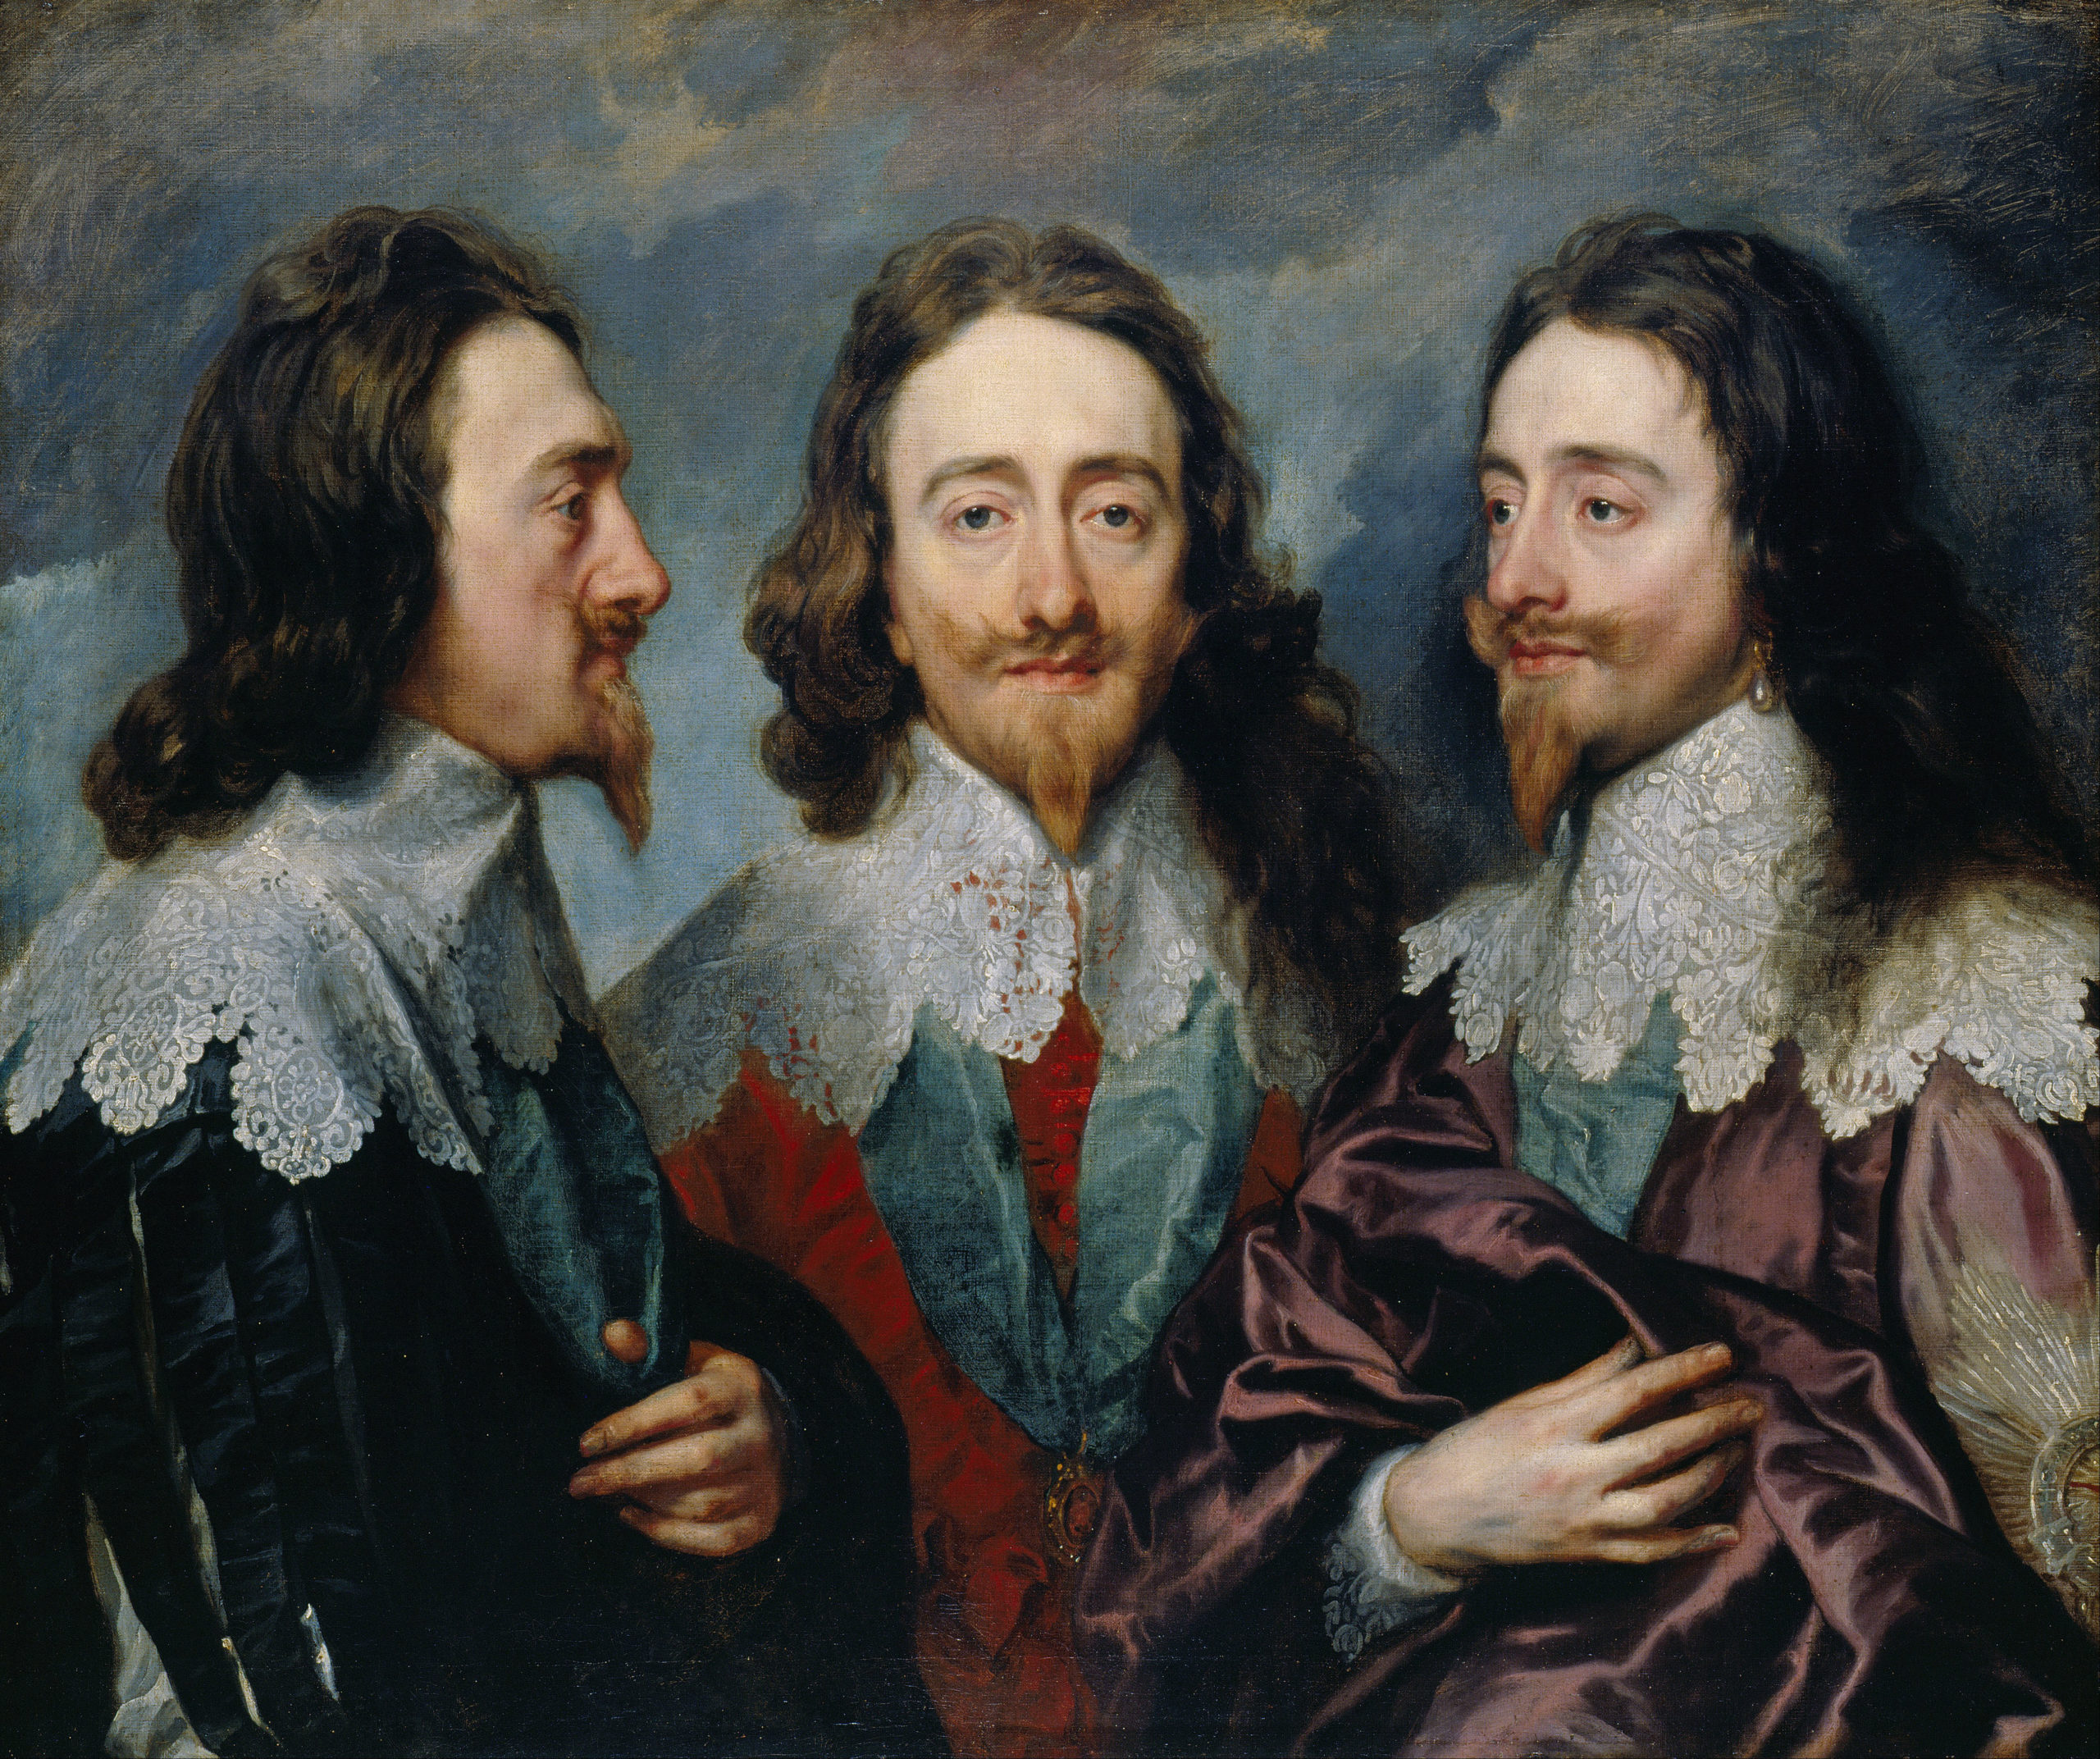 Anthony van Dyck, Charles I, before 1635, oil on canvas, 84.4 x 99.4 cm (Royal Collection Trust, London)